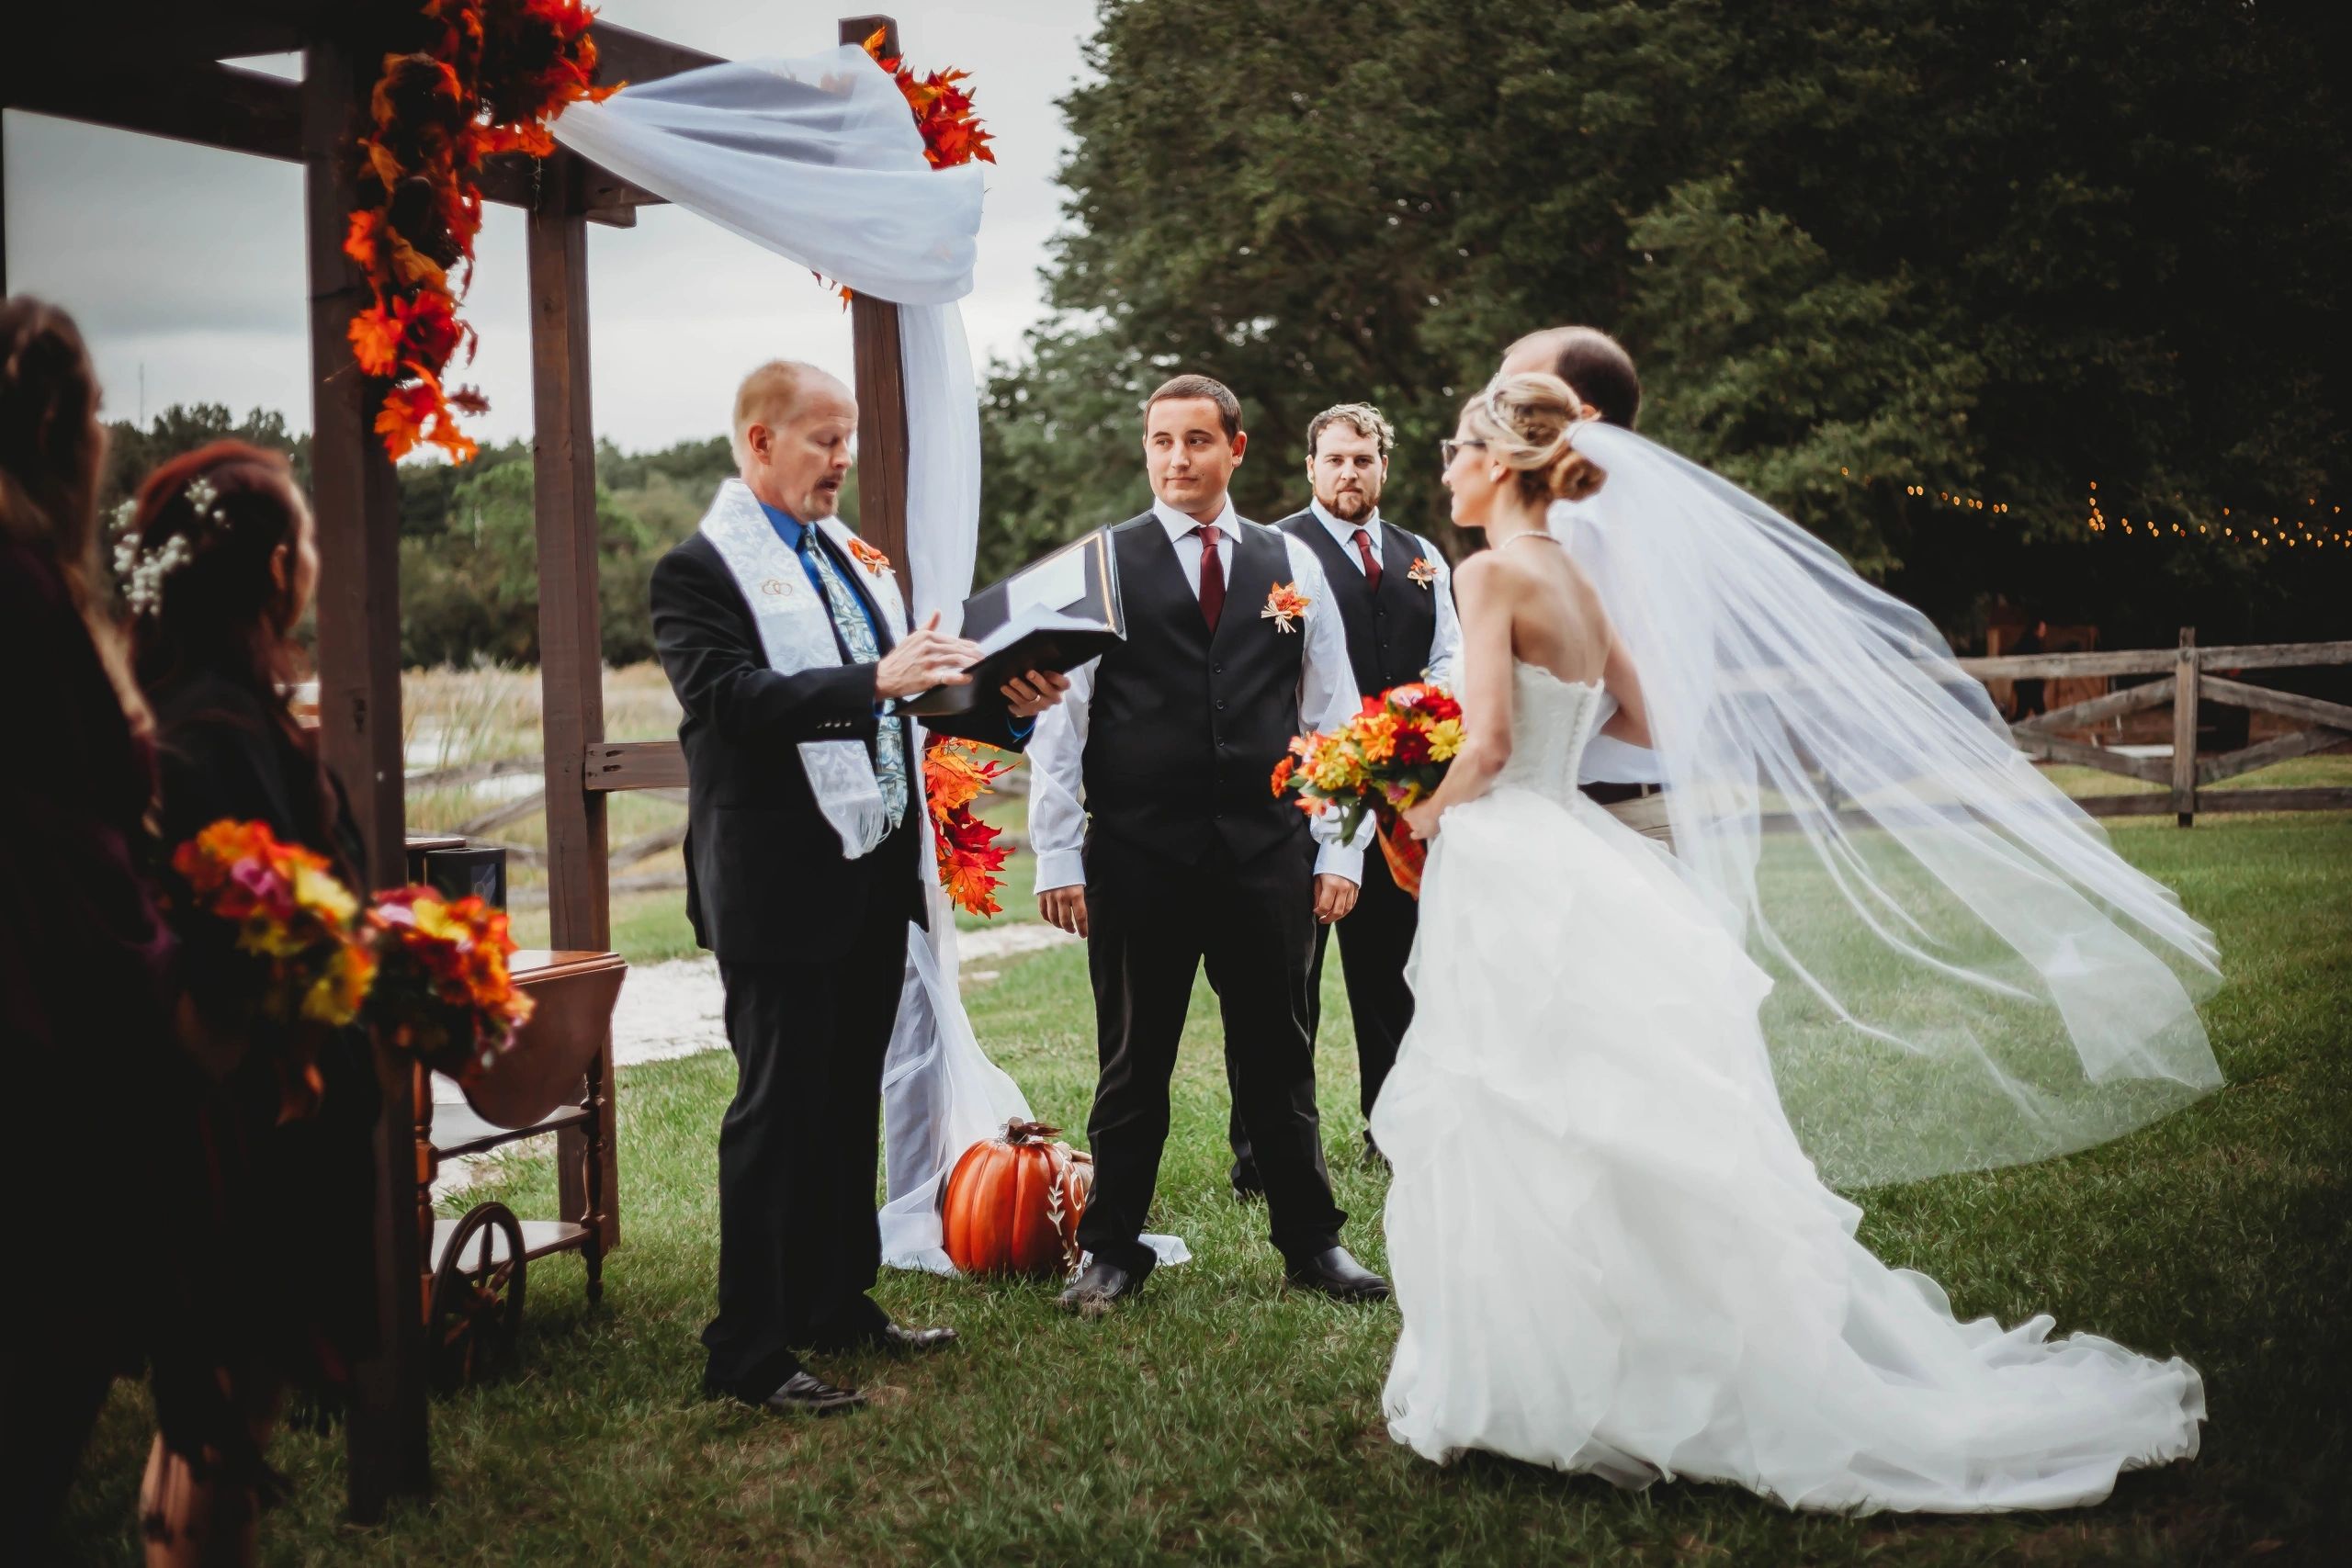 Top Tips To Find The Best Wedding Ceremony Officiant!